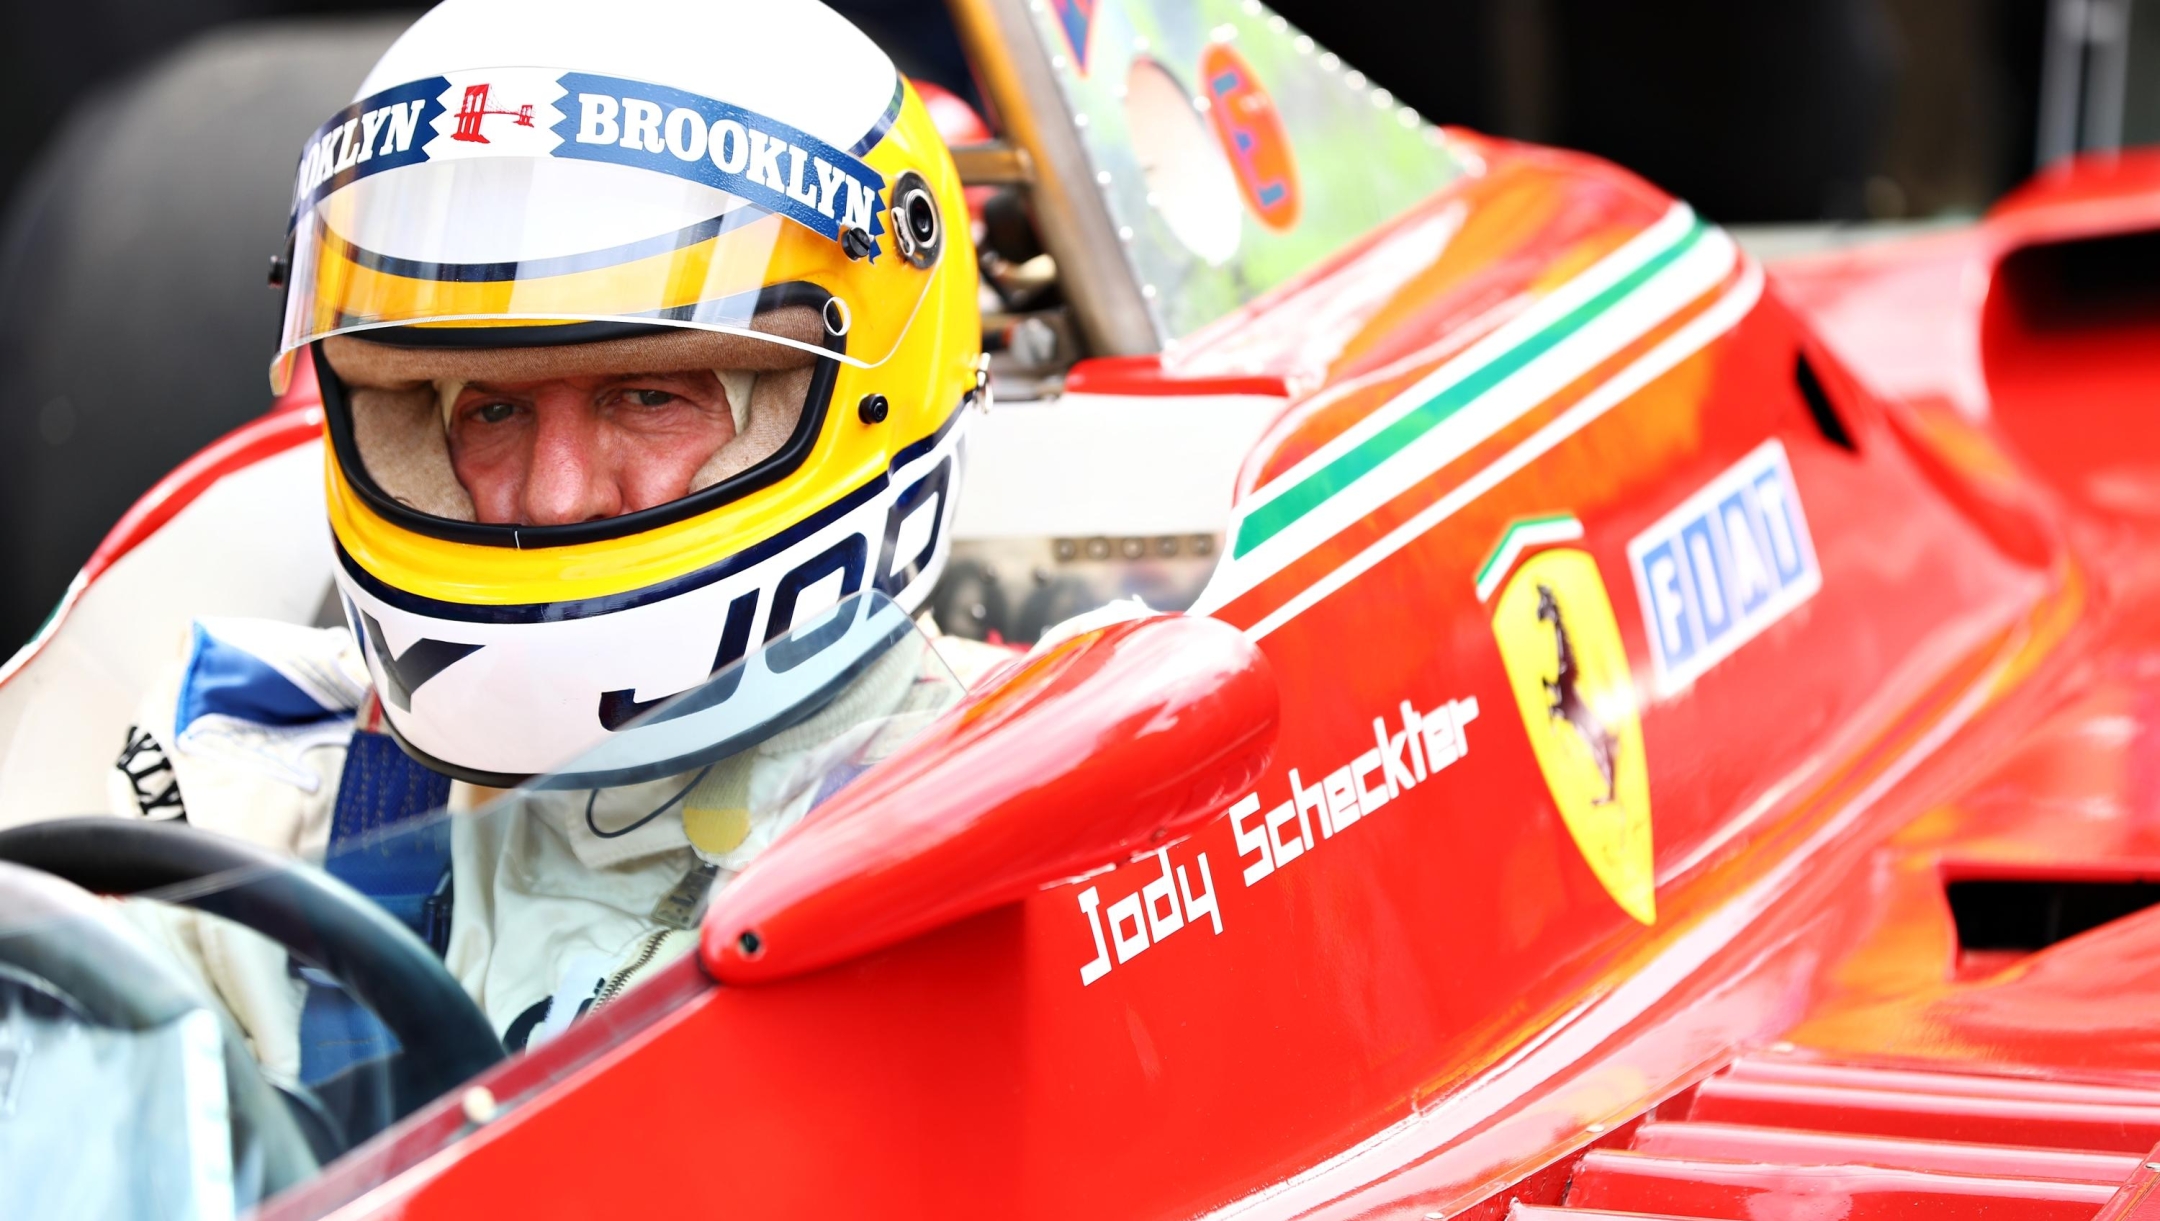 MONZA, ITALY - SEPTEMBER 07: Former F1 driver Jody Scheckter of South Africa prepares for a demonstration run in his Ferrari 312T4 before qualifying for the F1 Grand Prix of Italy at Autodromo di Monza on September 07, 2019 in Monza, Italy. (Photo by Mark Thompson/Getty Images)